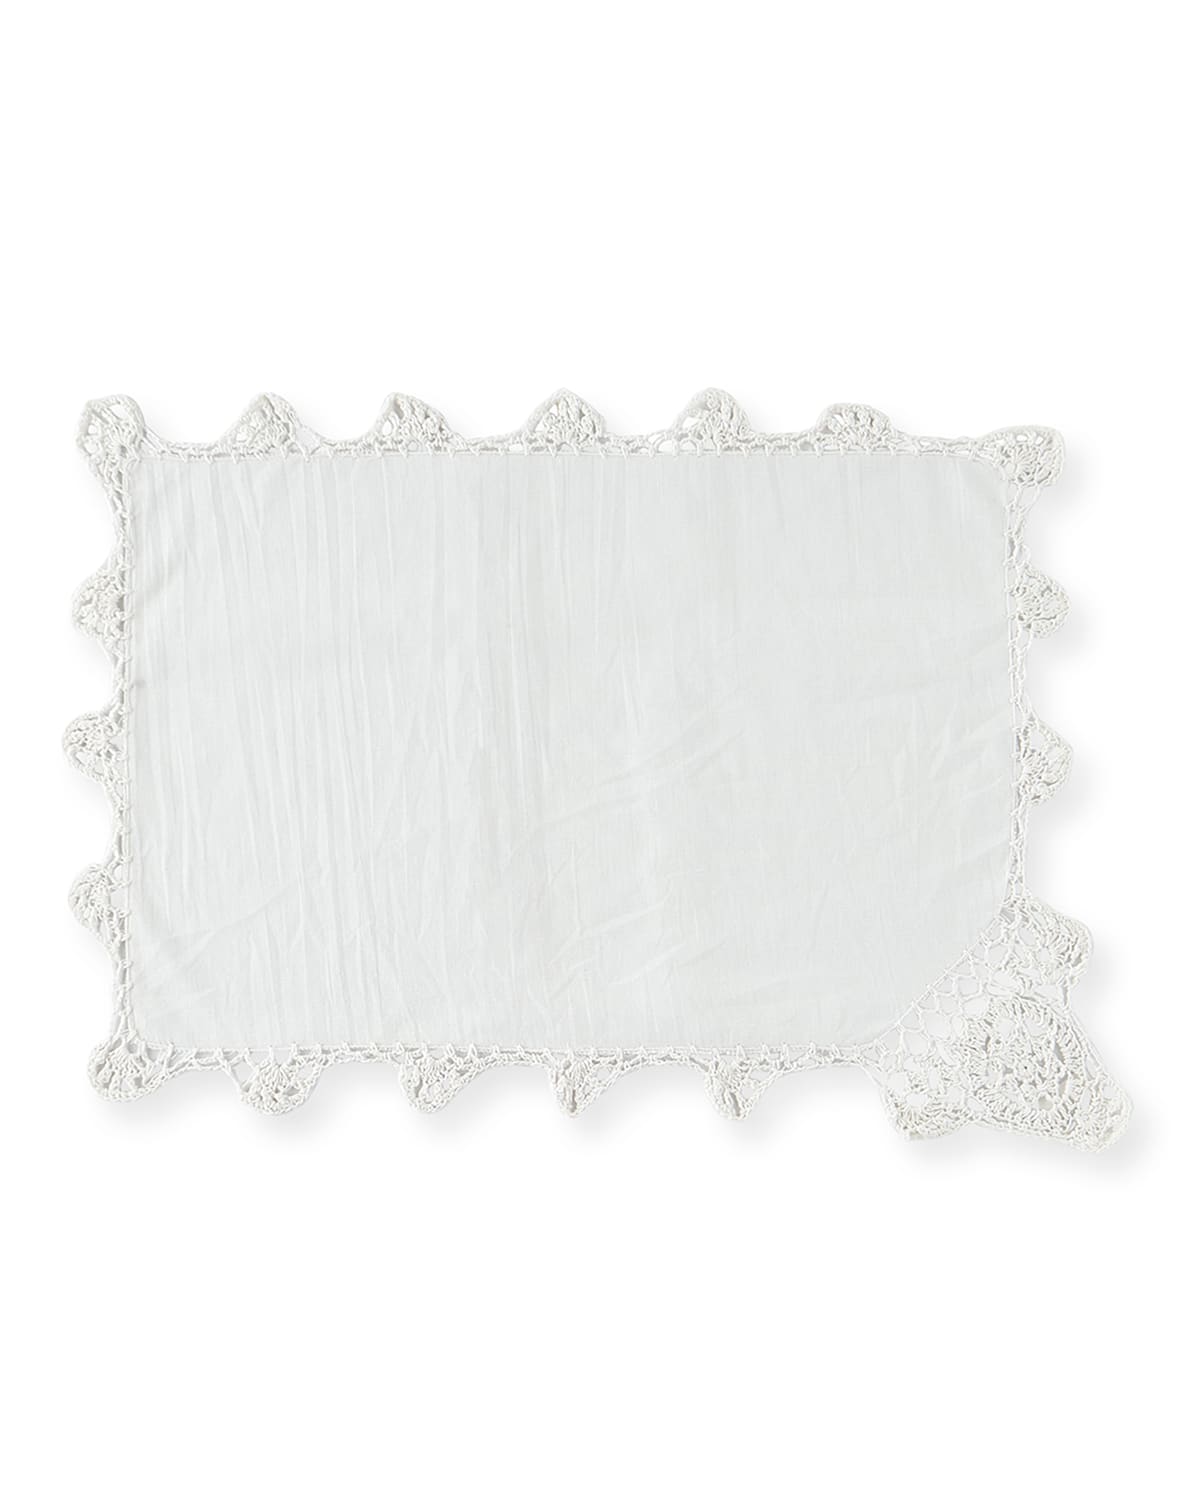 Shop Boutross Imports Crochet Edge Placemats, Set Of 12 In White